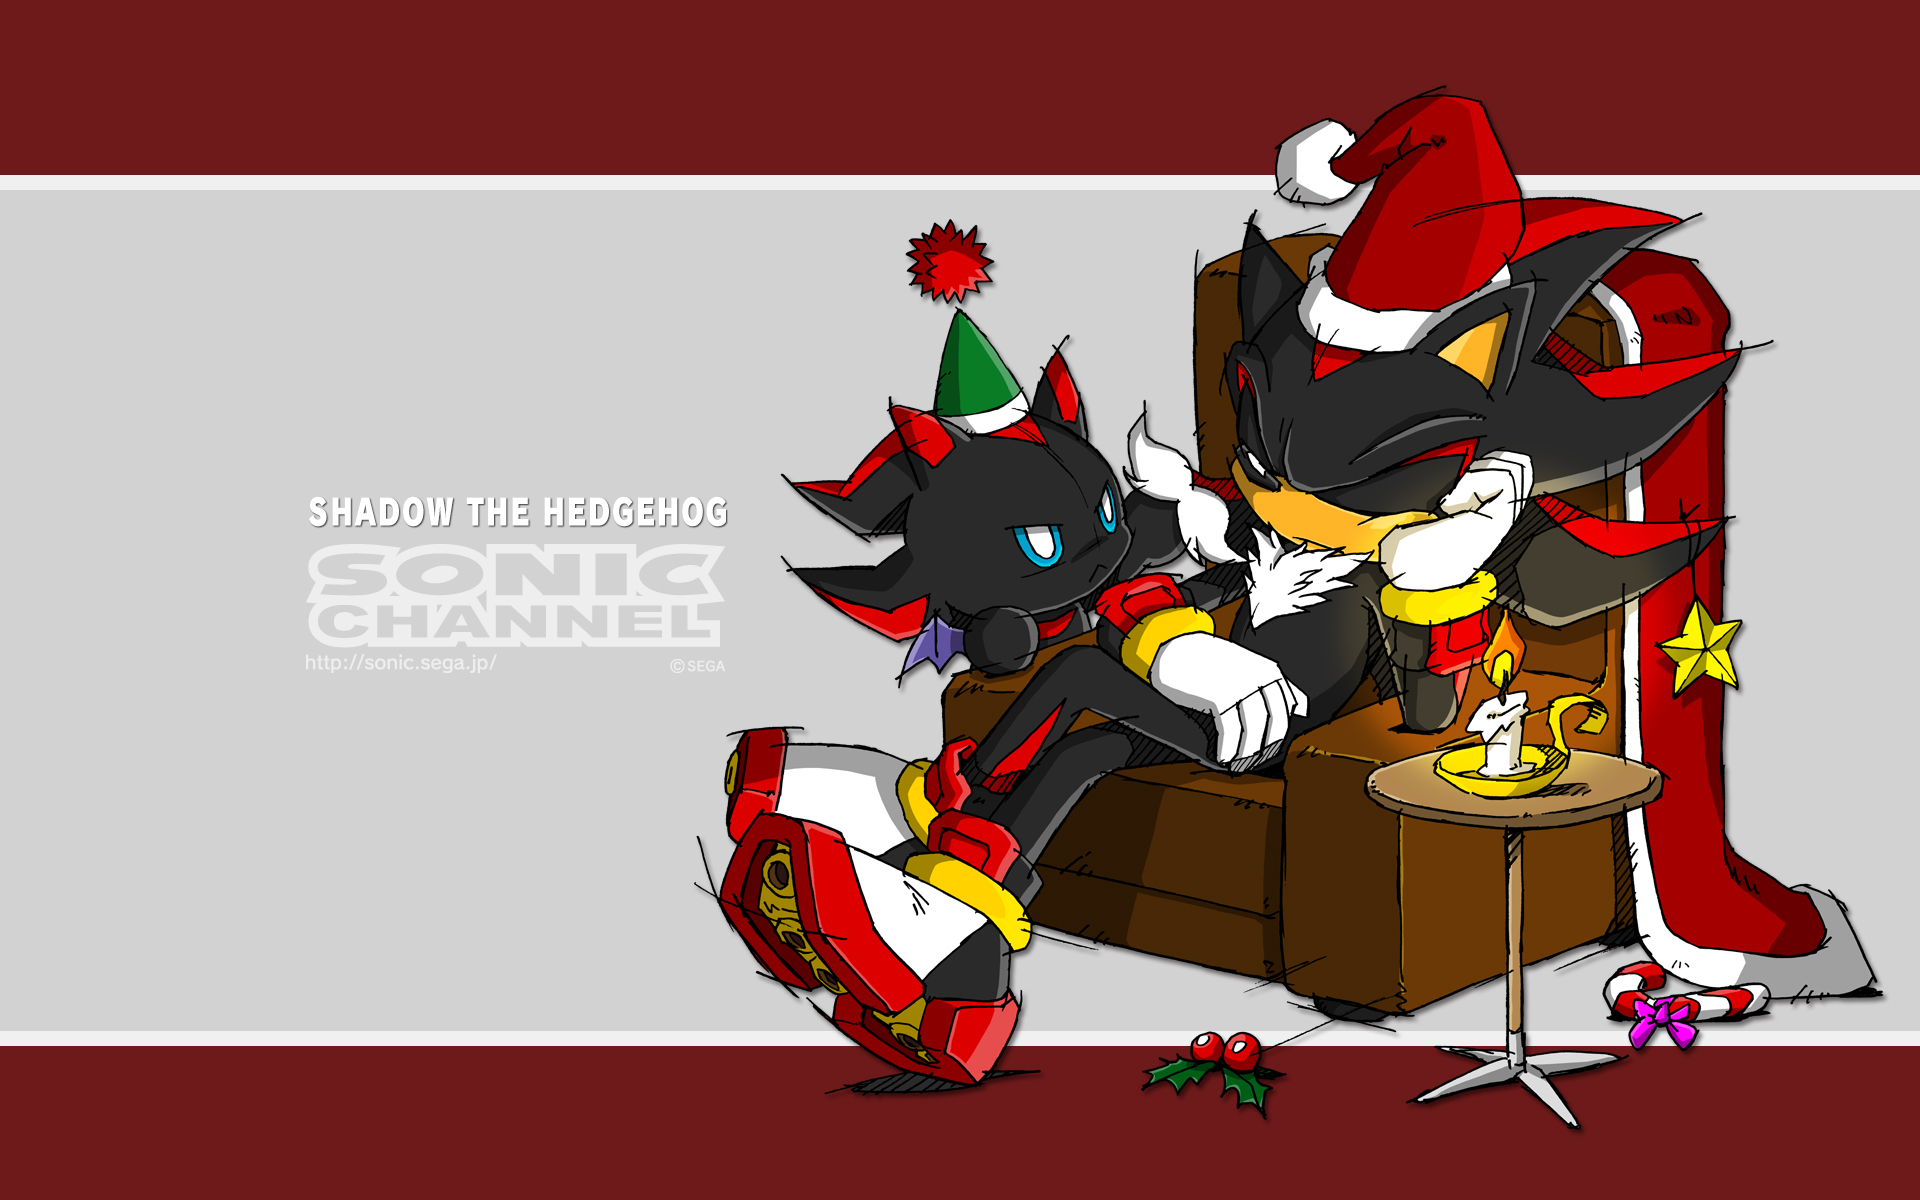 Images tagged "shadow-the-hedgehog" .